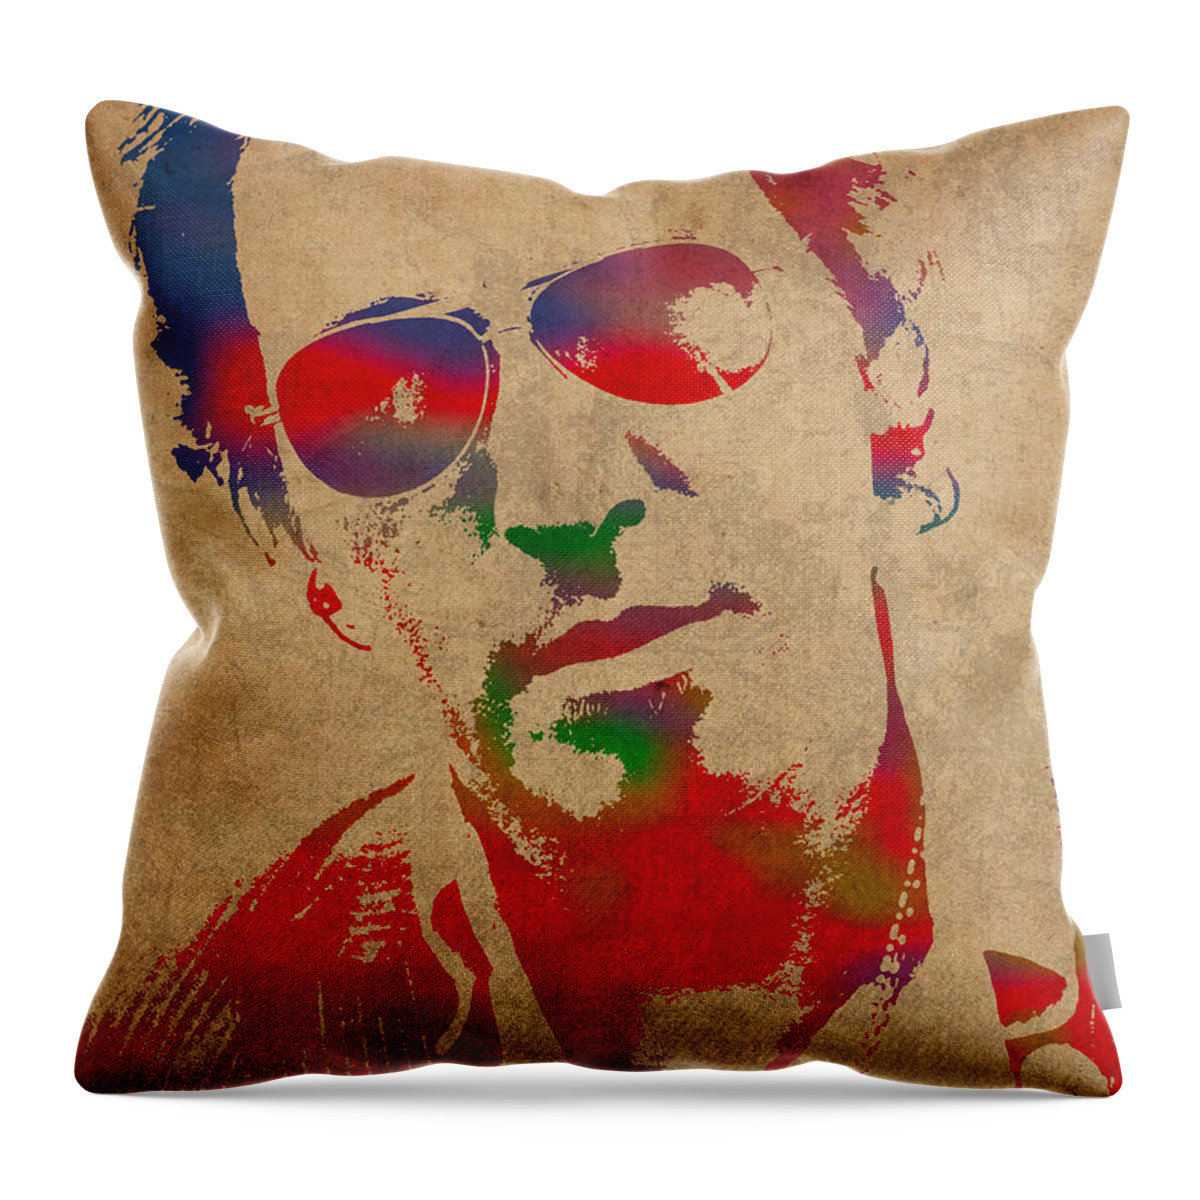 Bruce Springsteen Watercolor Portrait On Worn Distressed Canvas Throw Pillow featuring the mixed media Bruce Springsteen Watercolor Portrait on Worn Distressed Canvas by Design Turnpike